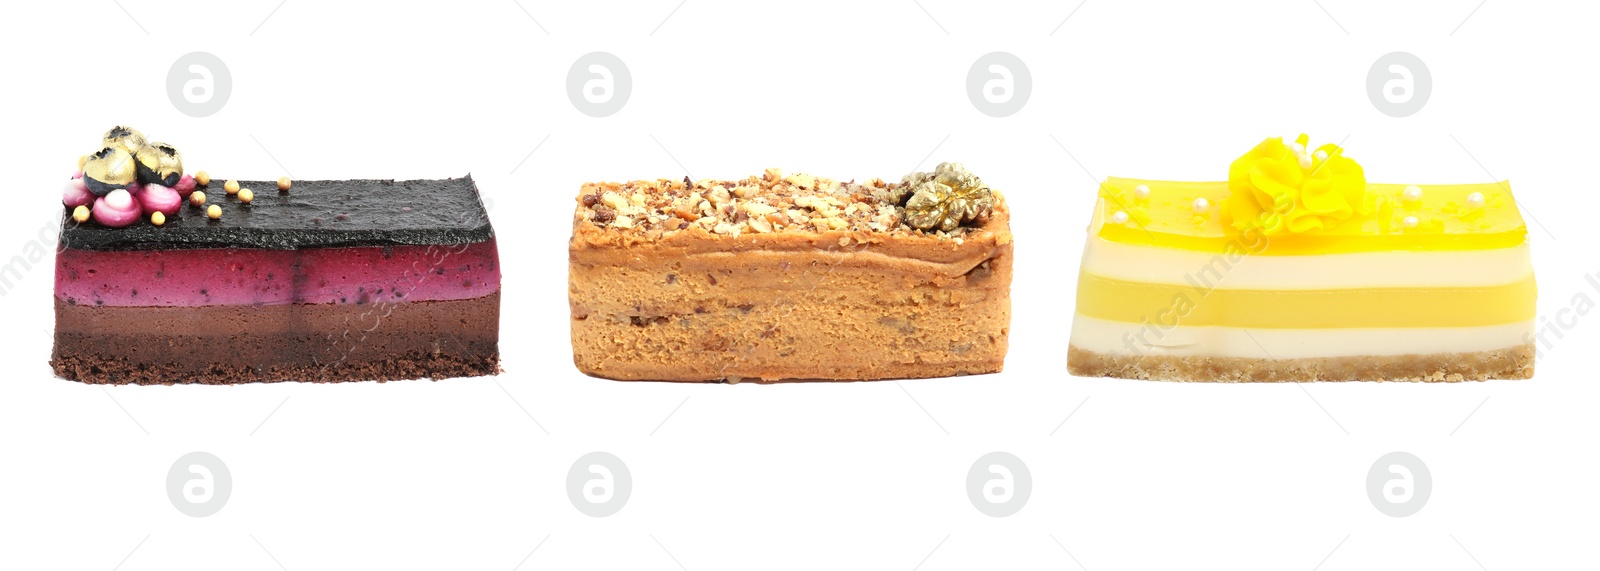 Image of Set of different delicious cakes on white background